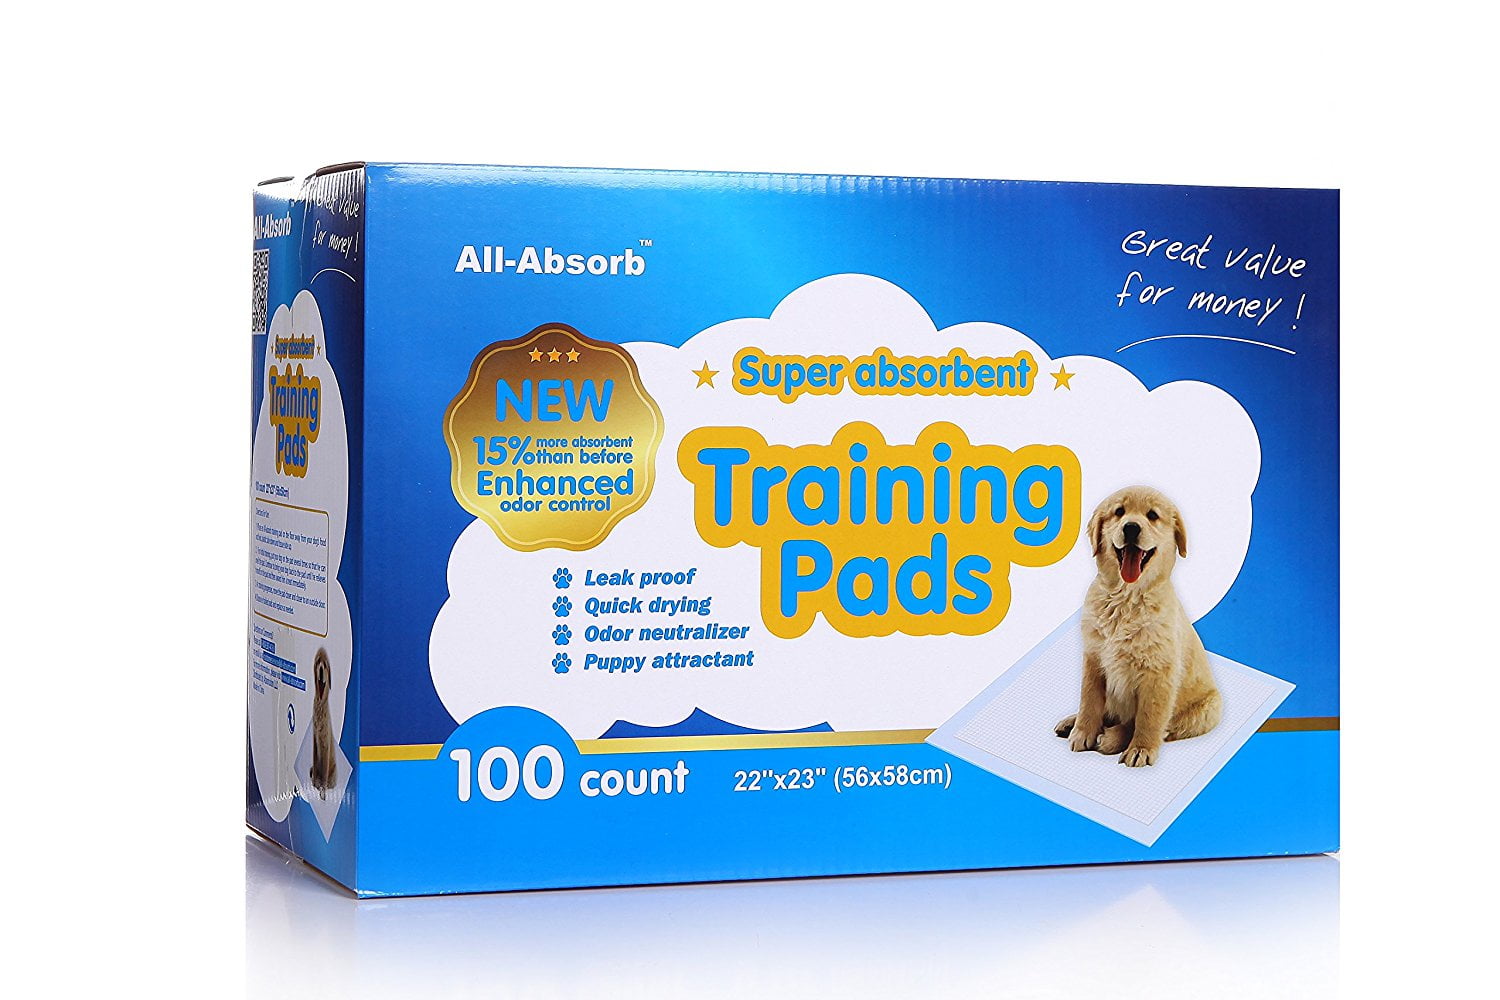 All Absorb 100 Count Underpads Dog Puppy Pet Housebreaking Training Pee Pads 